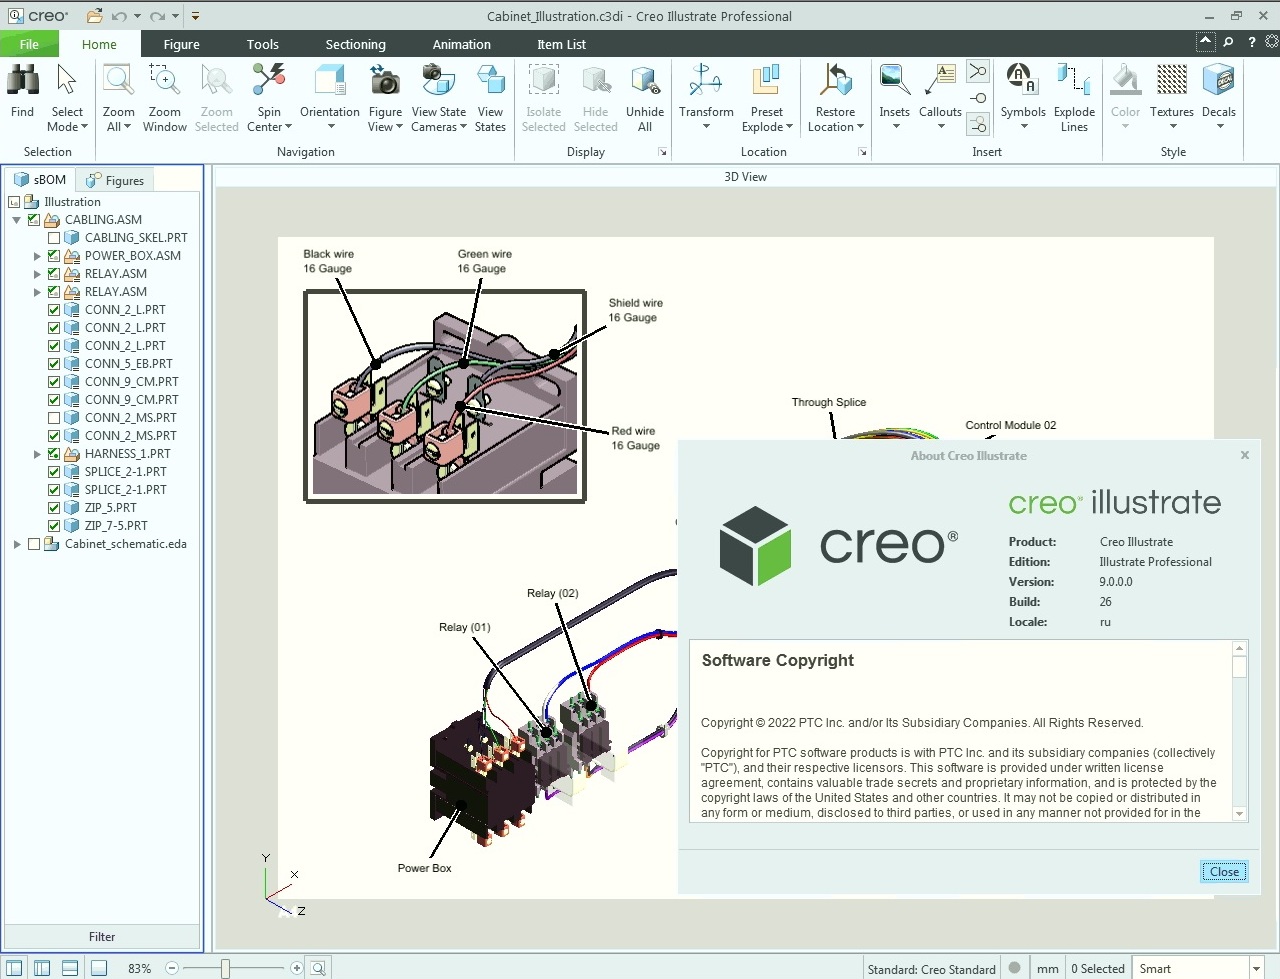 Working with PTC Creo Illustrate 9.0.0.0 full